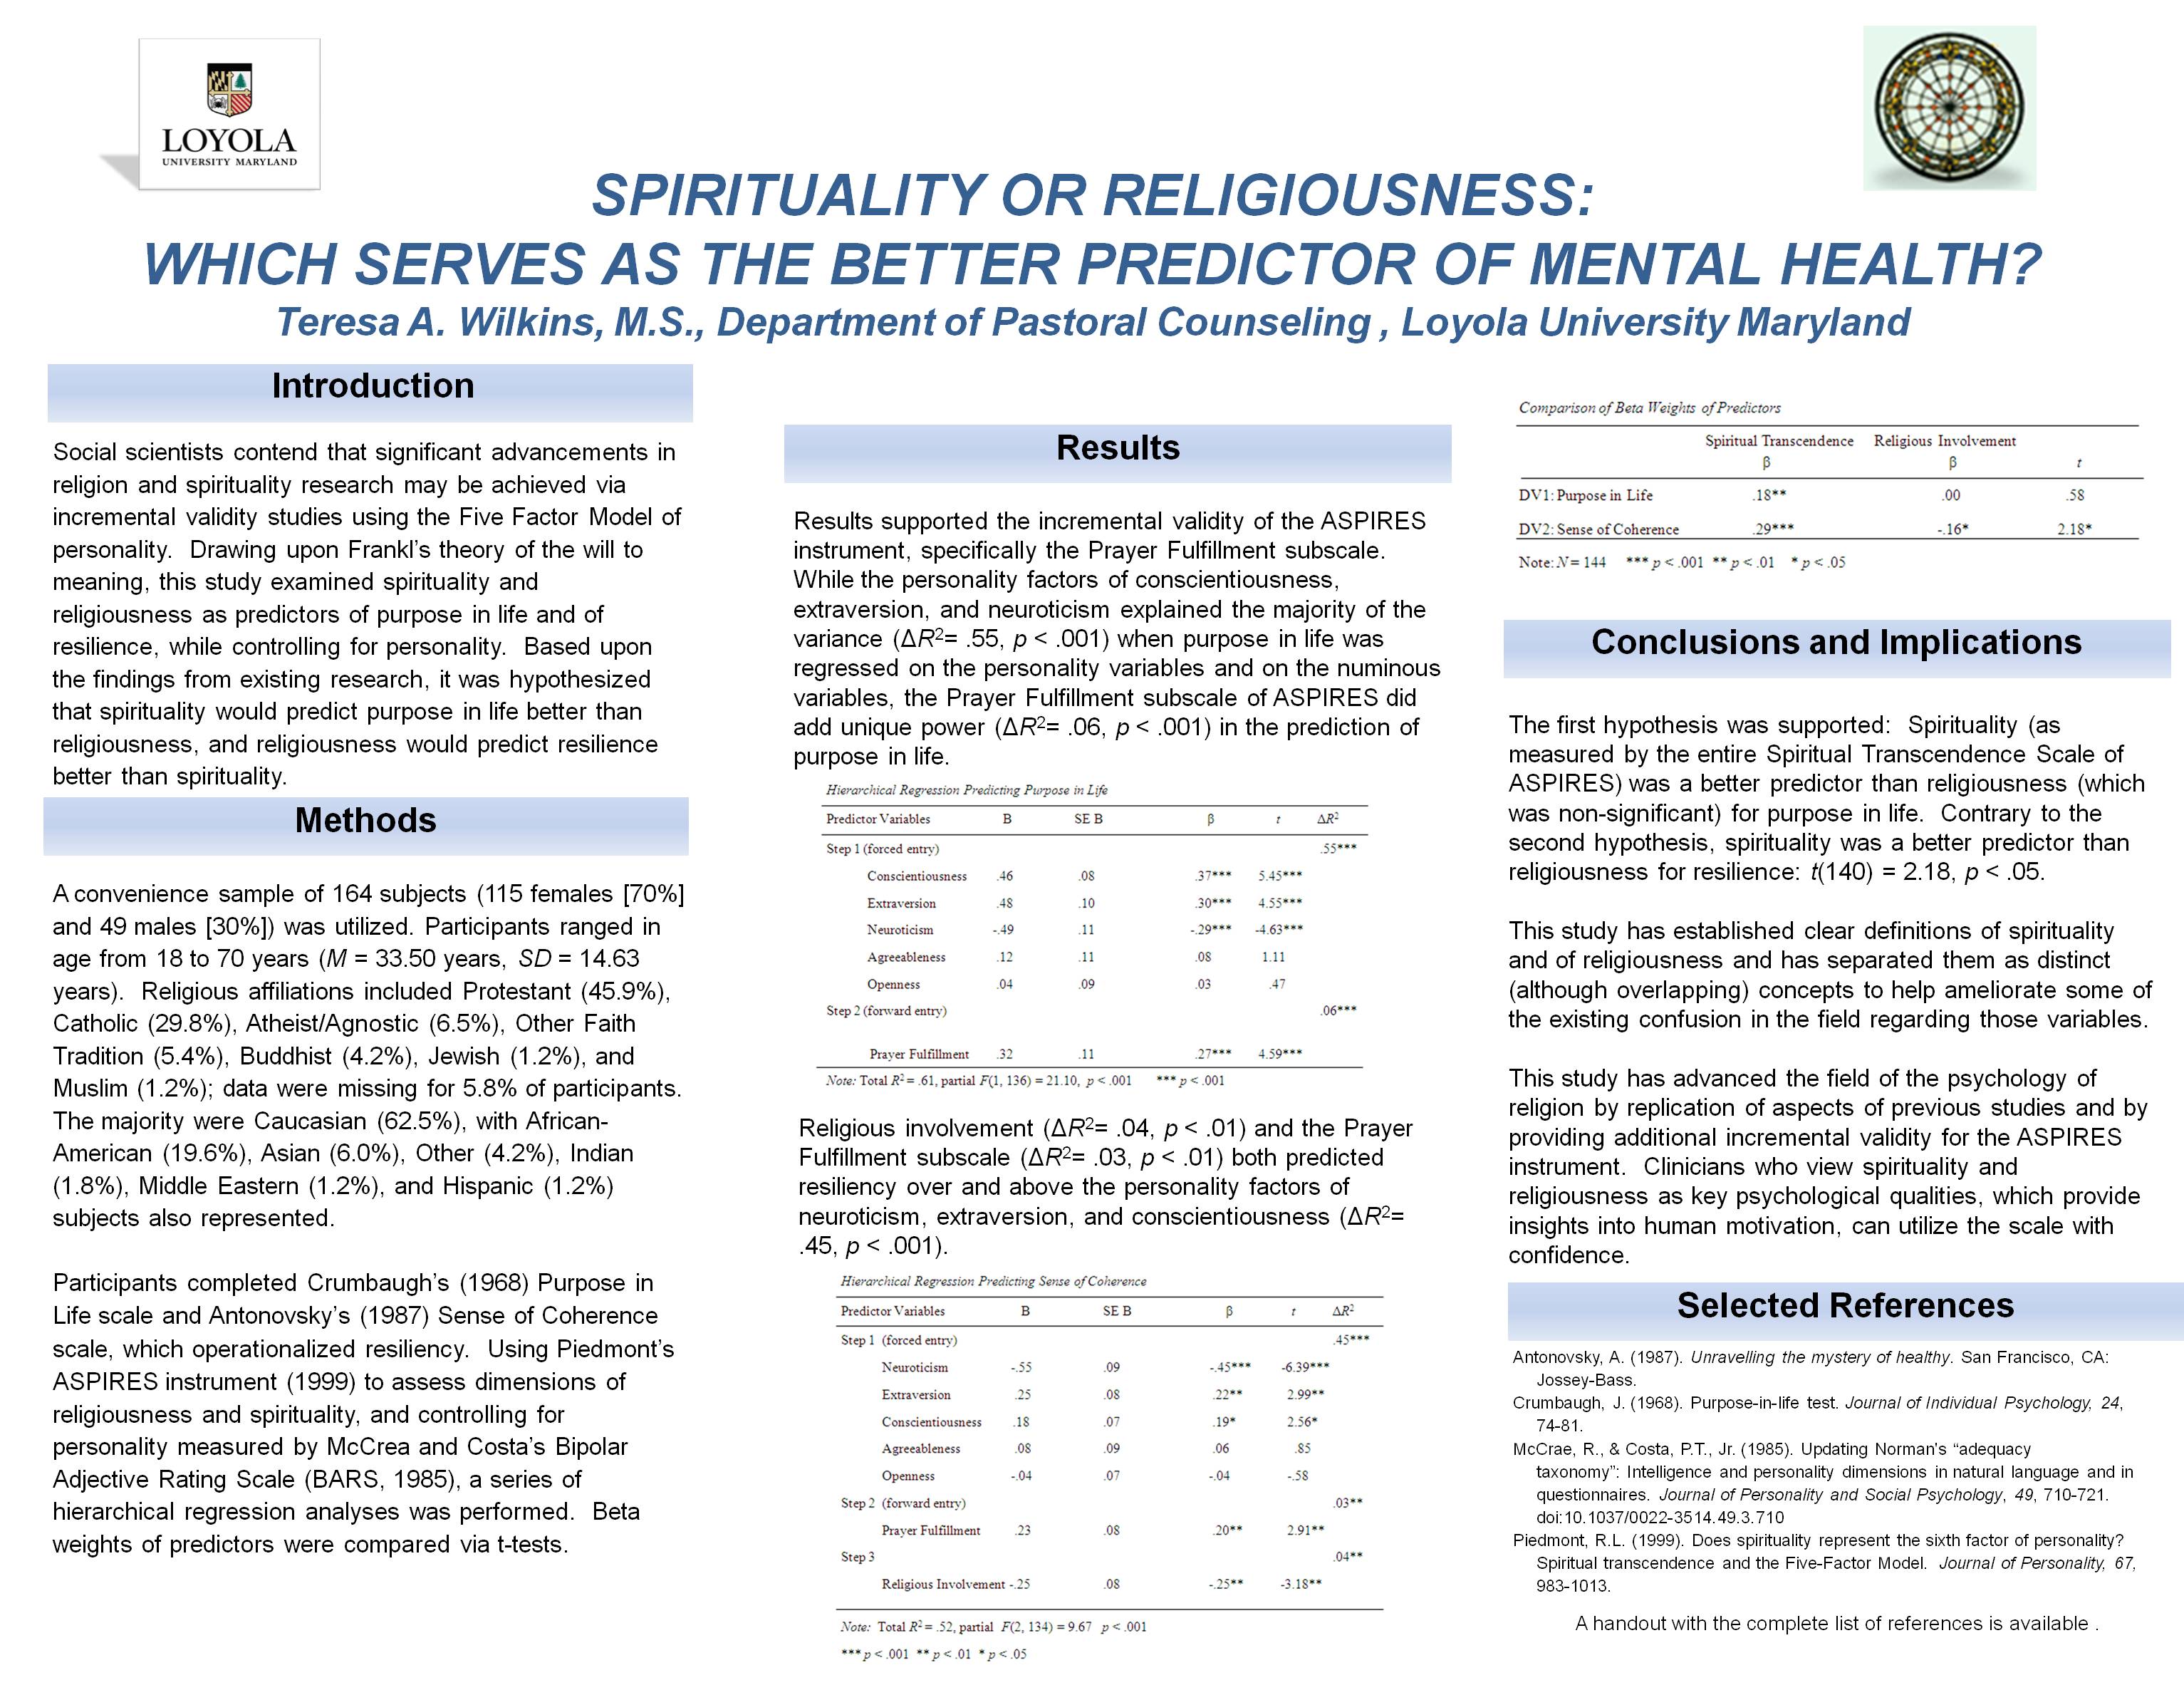 Poster image: Spirituality or Religiousness: Which Serves as the Better Predictor of Mental Health?